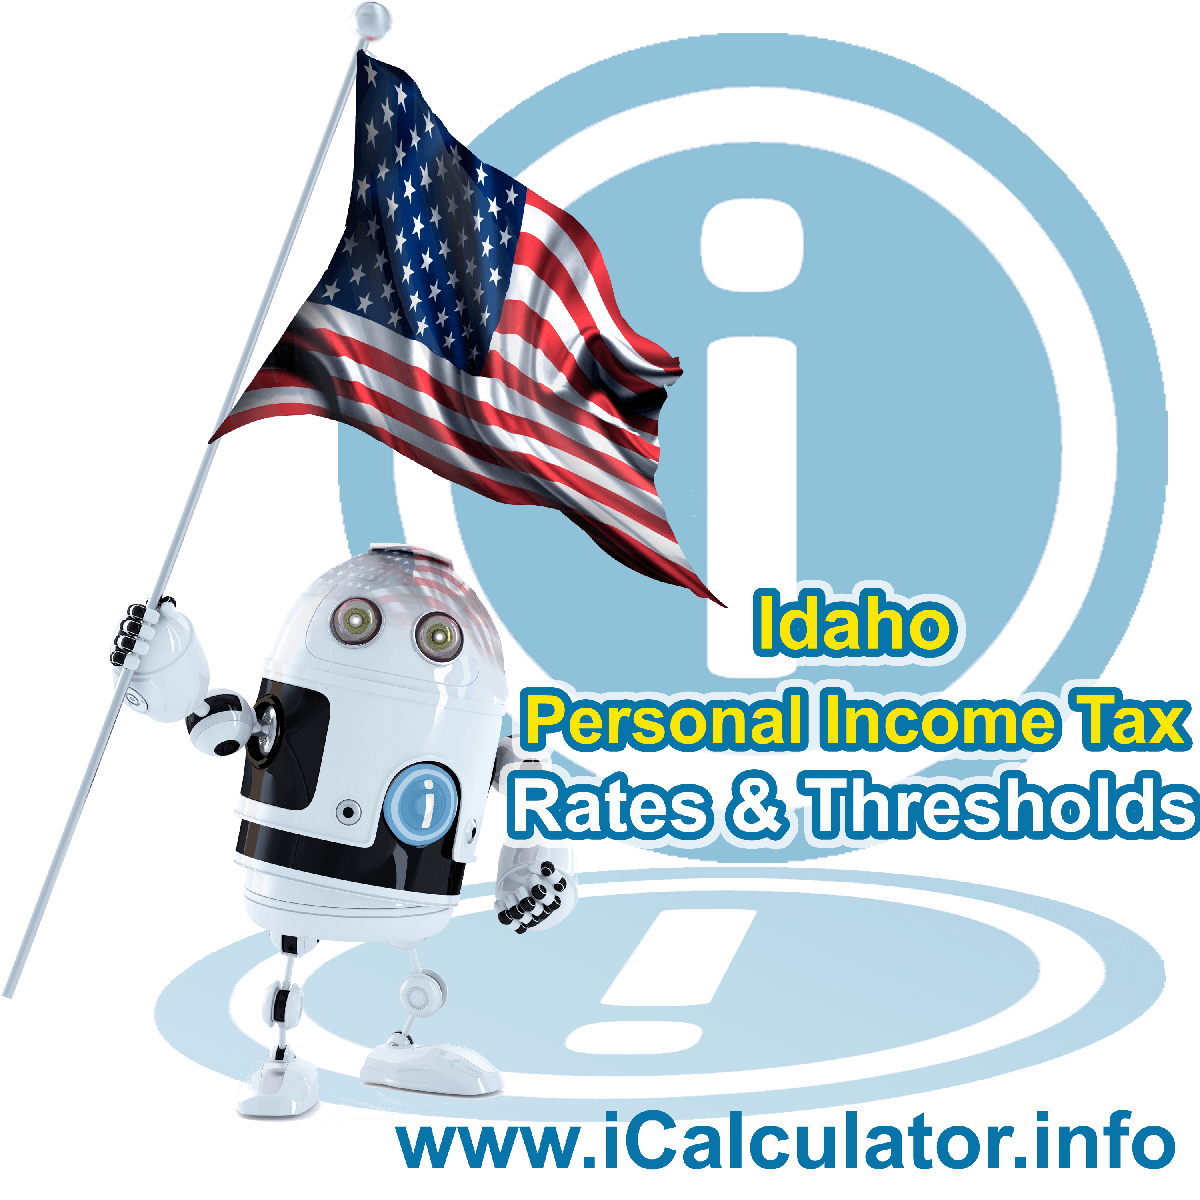 Idaho State Tax Tables 2023. This image displays details of the Idaho State Tax Tables for the 2023 tax return year which is provided in support of the 2023 US Tax Calculator